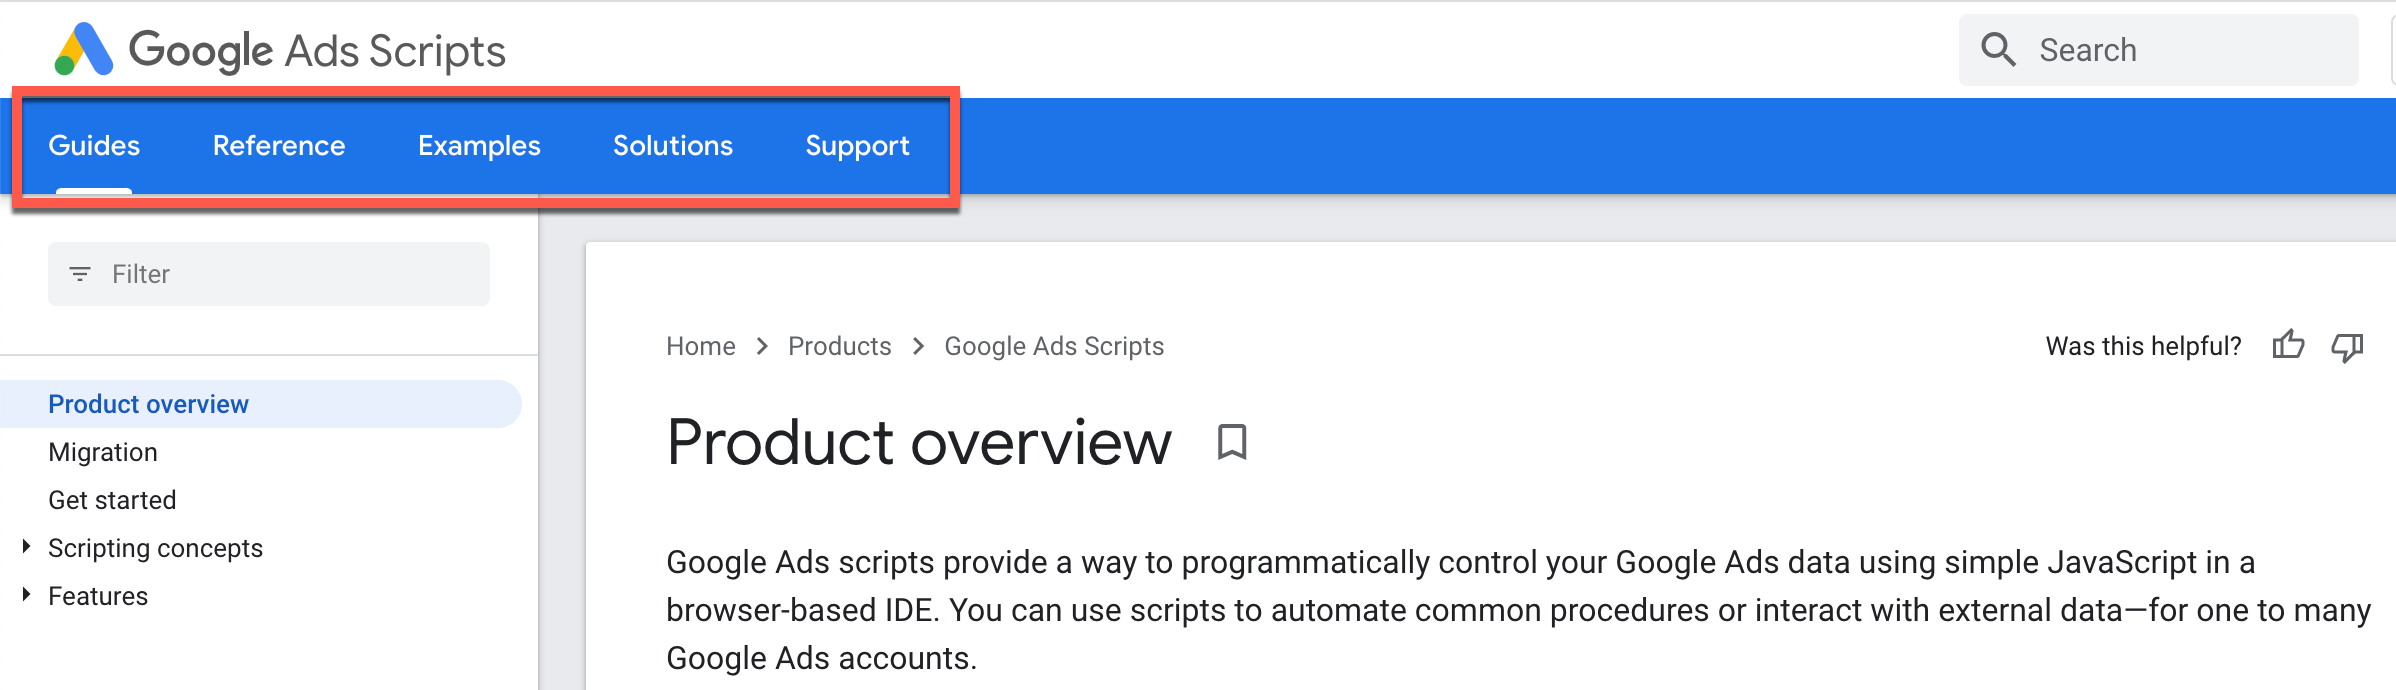 Sections on Google Ads Script pages